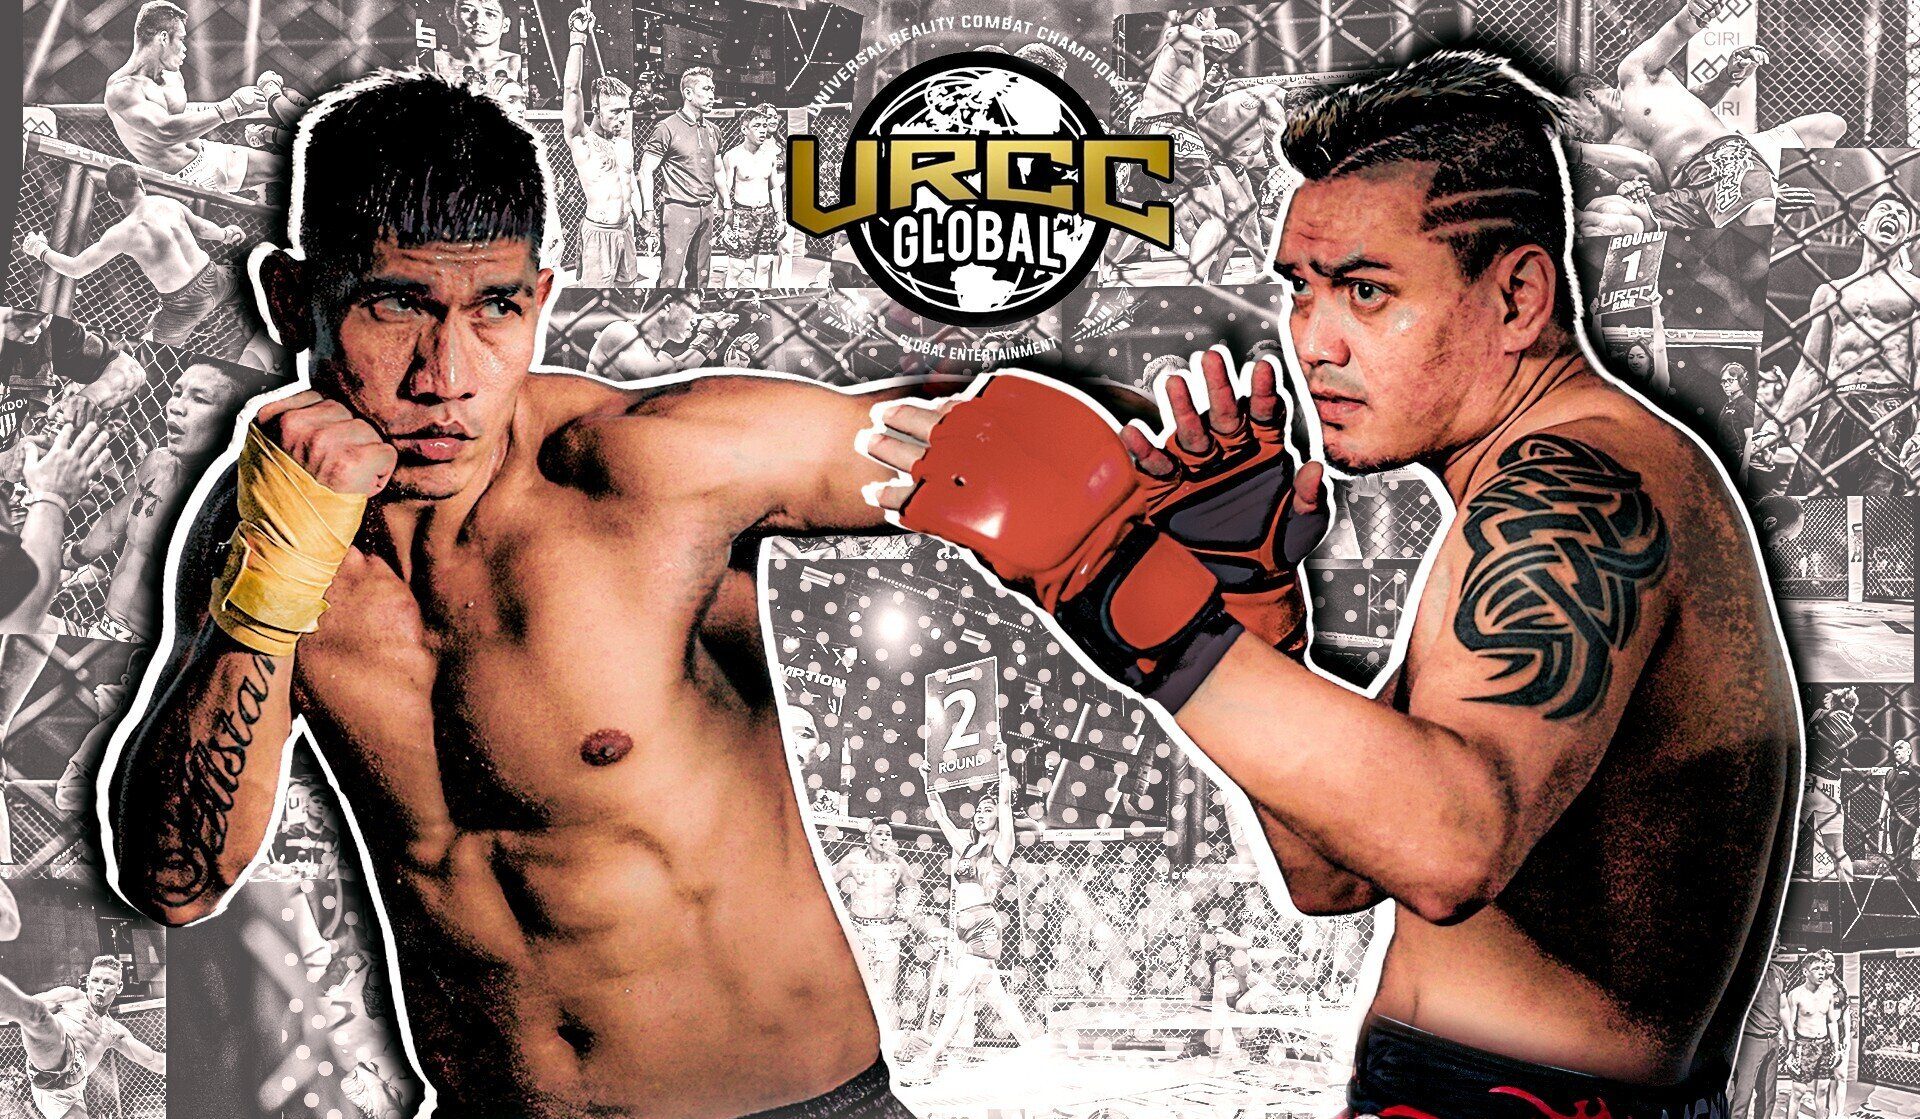 ‘Raw fighting’ takes centerstage in URCC